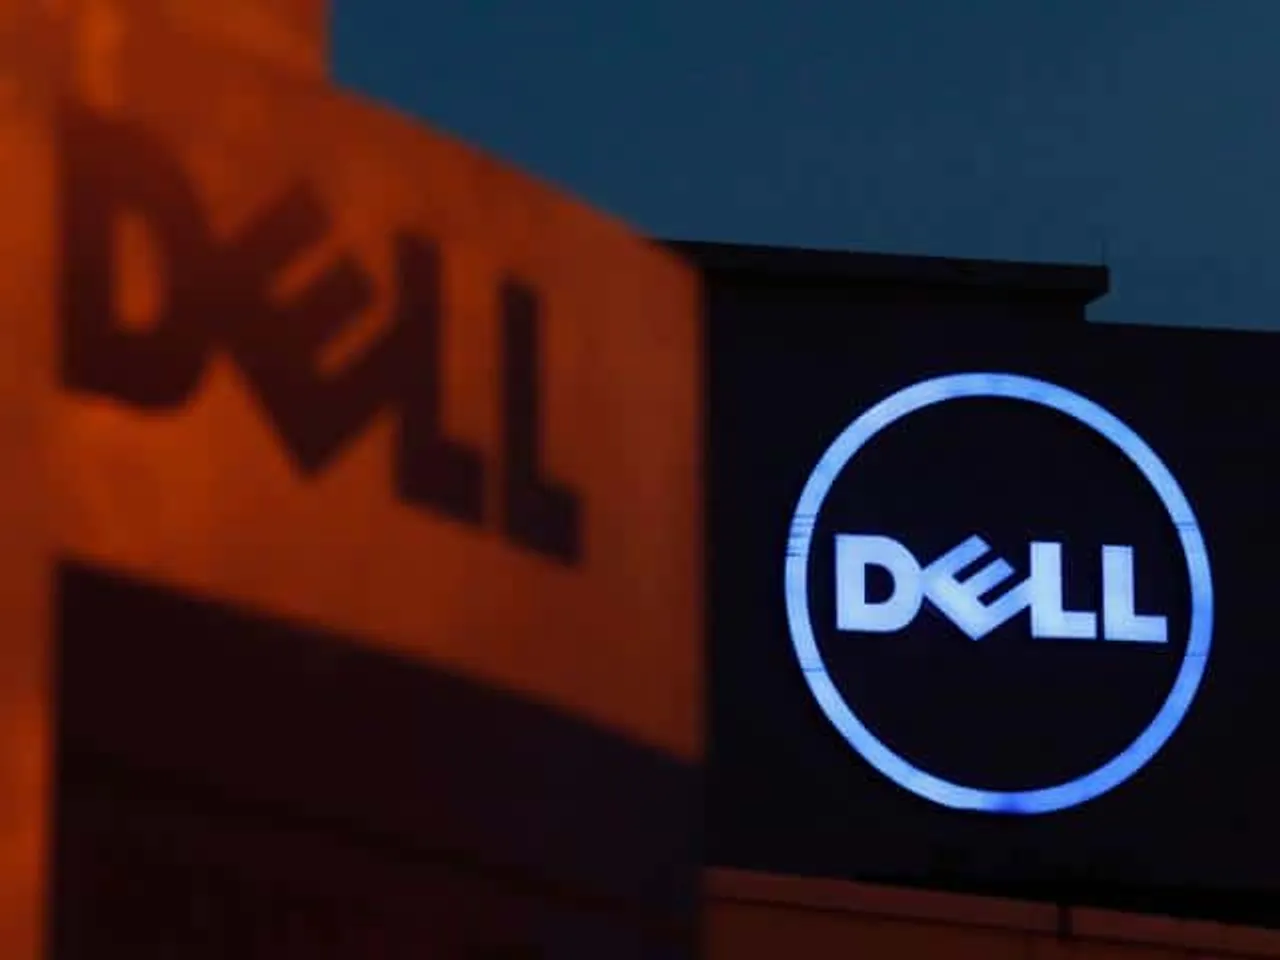 Dell EMC Introduces All-Flash Storage Systems to Help Customers